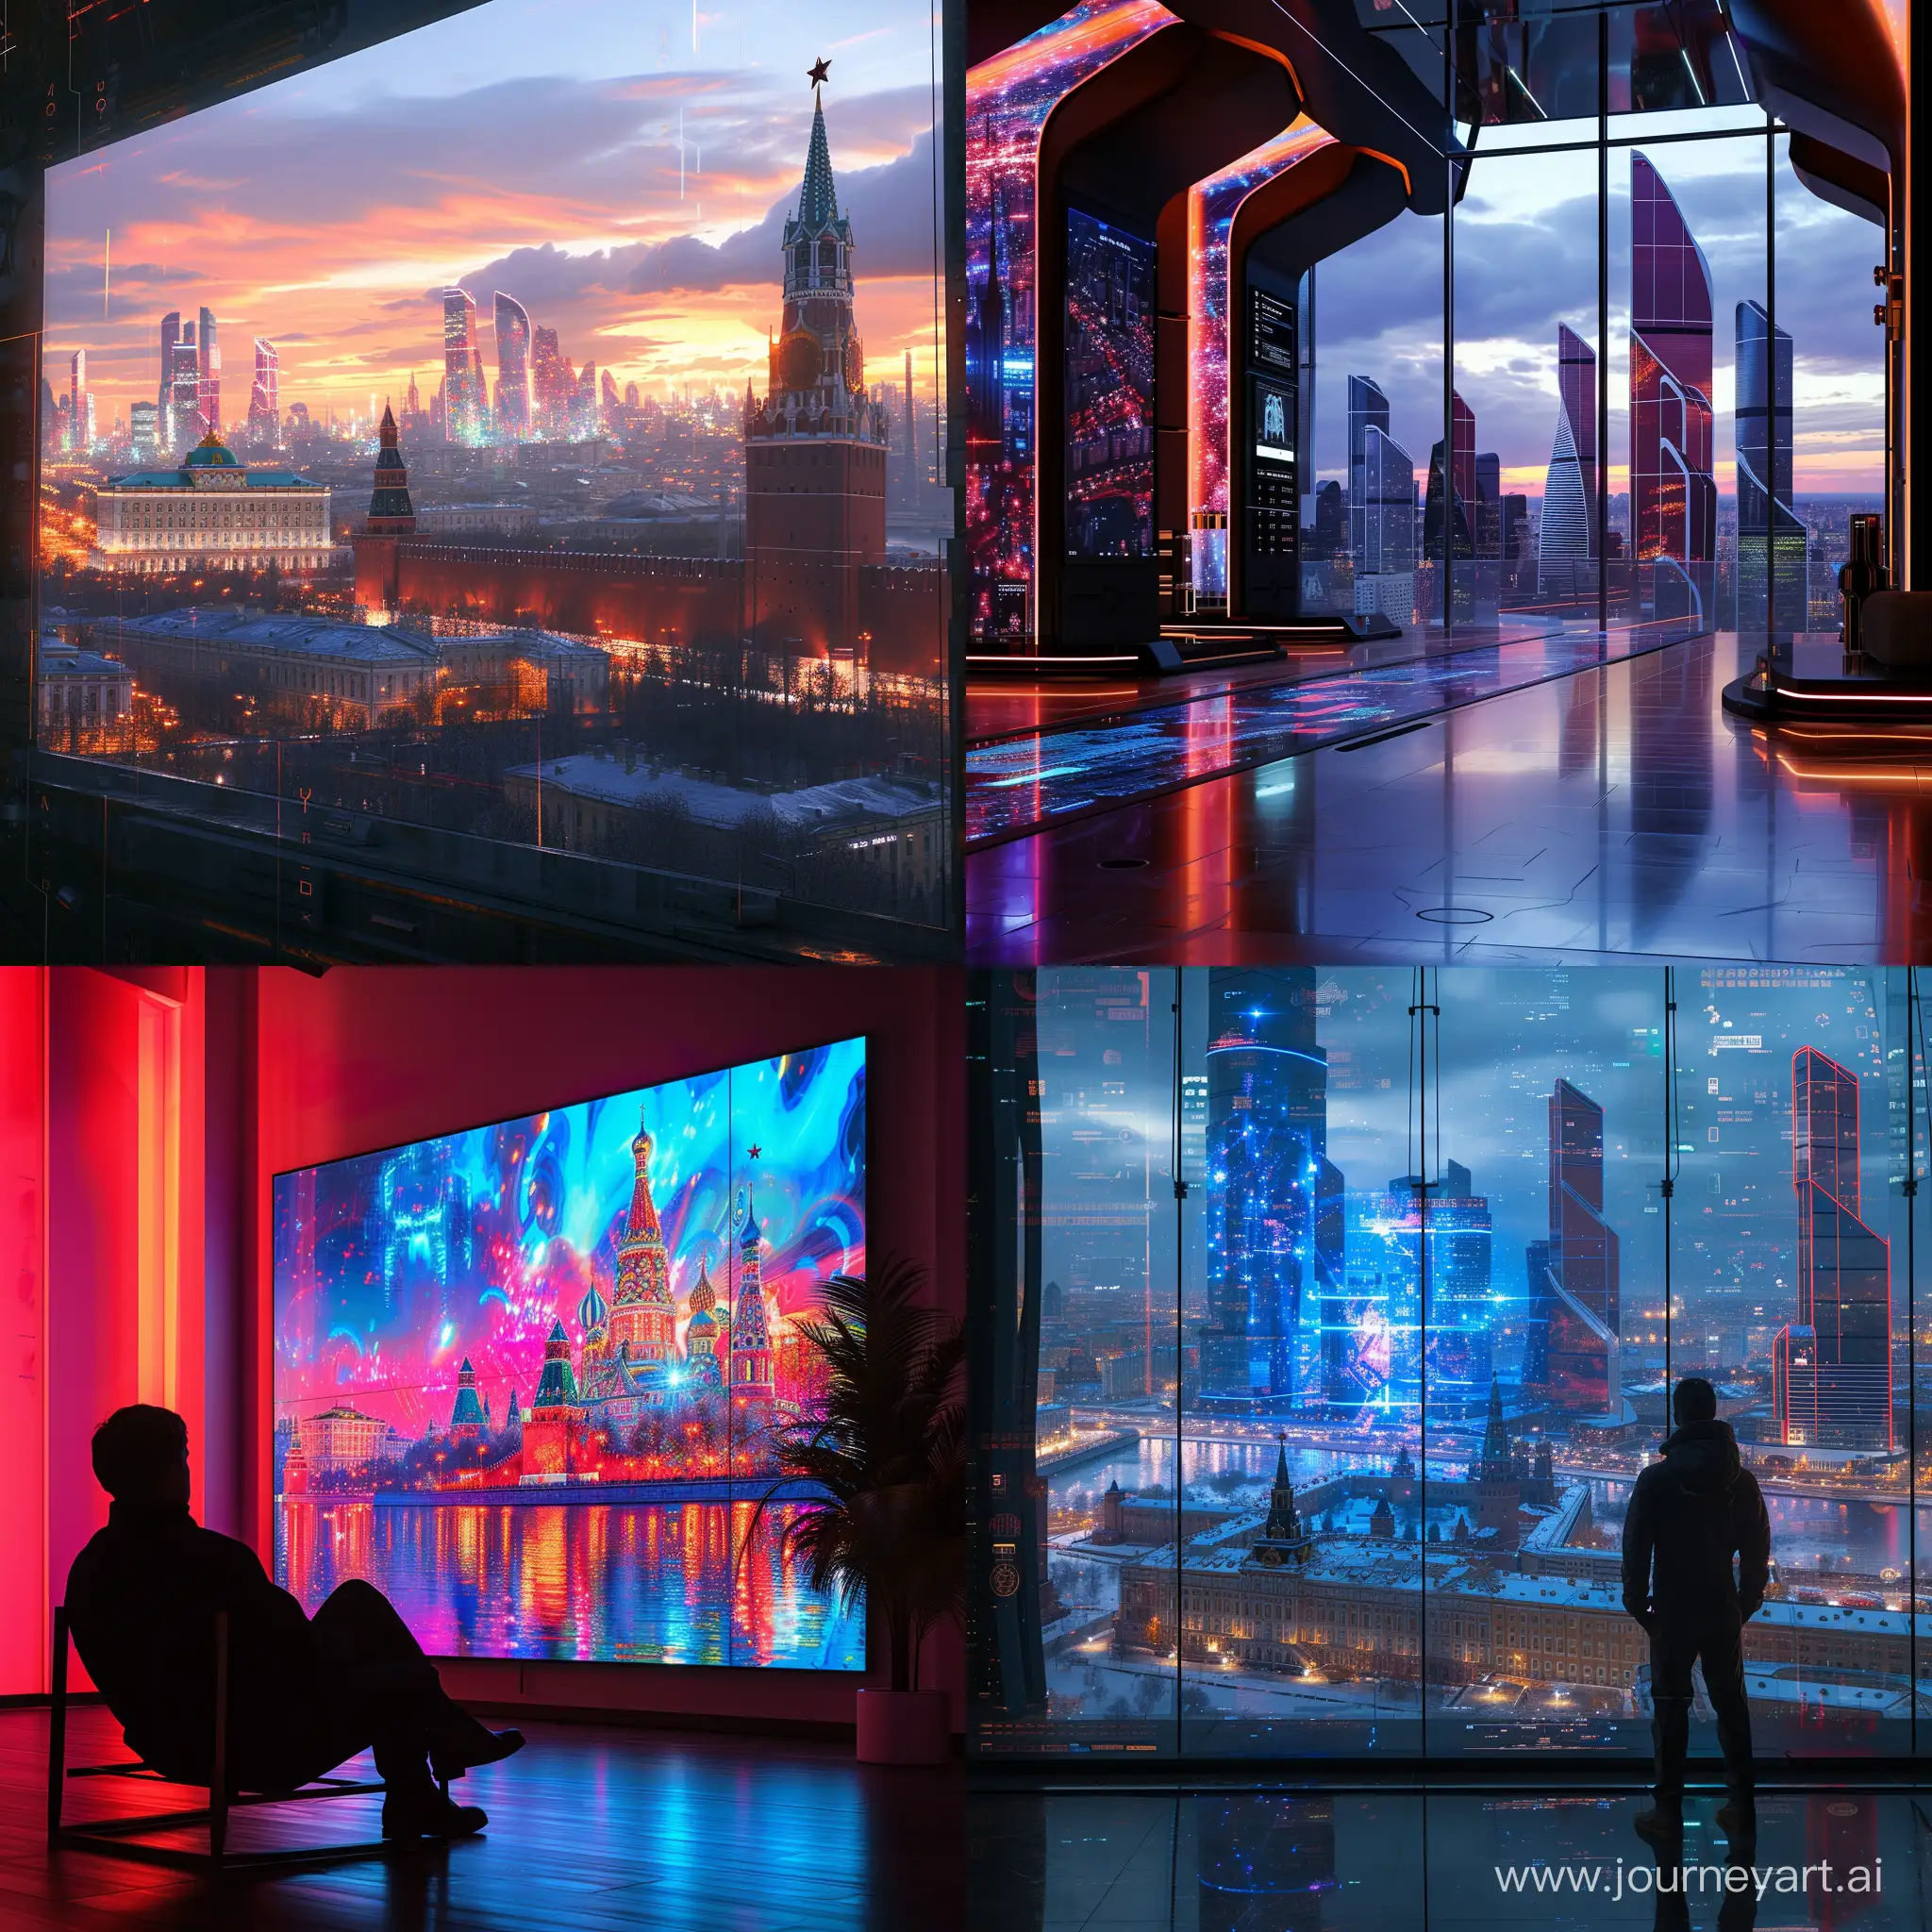 Futuristic Moscow, QD-OLED displays, QD-OLED lighting and backlight, in cinematic style